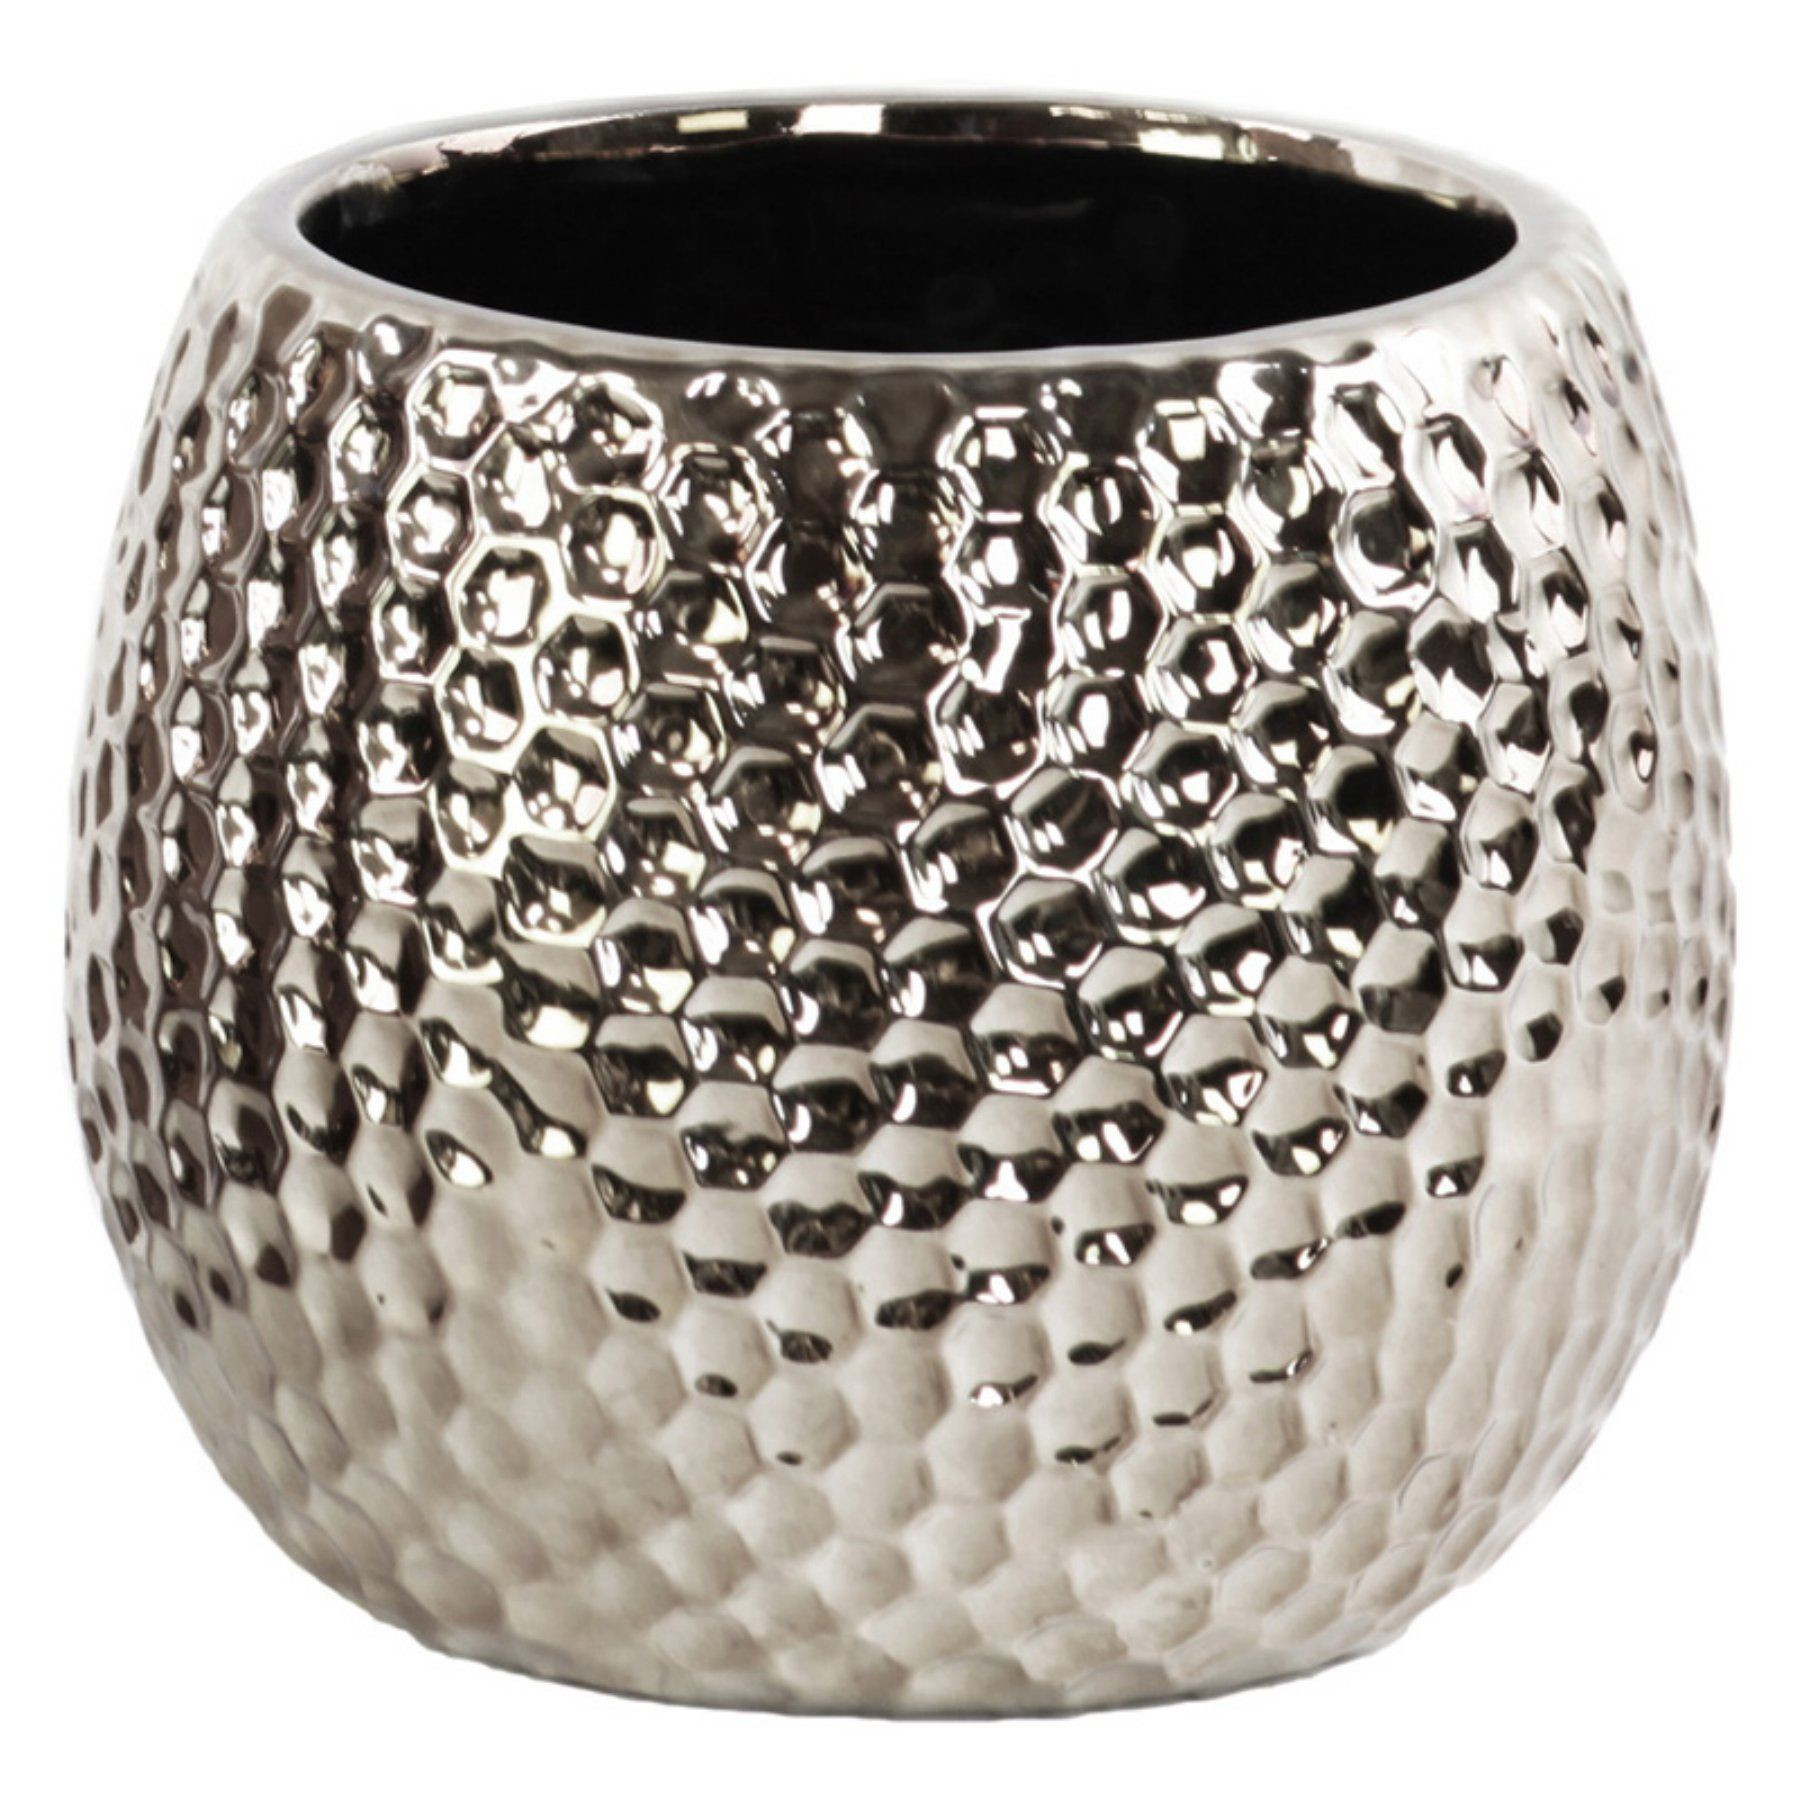 18 Recommended Thin Rectangle Glass Vase 2024 free download thin rectangle glass vase of urban trends low dimpled polished chrome round ceramic table vase for urban trends low dimpled polished chrome round ceramic table vase 24480